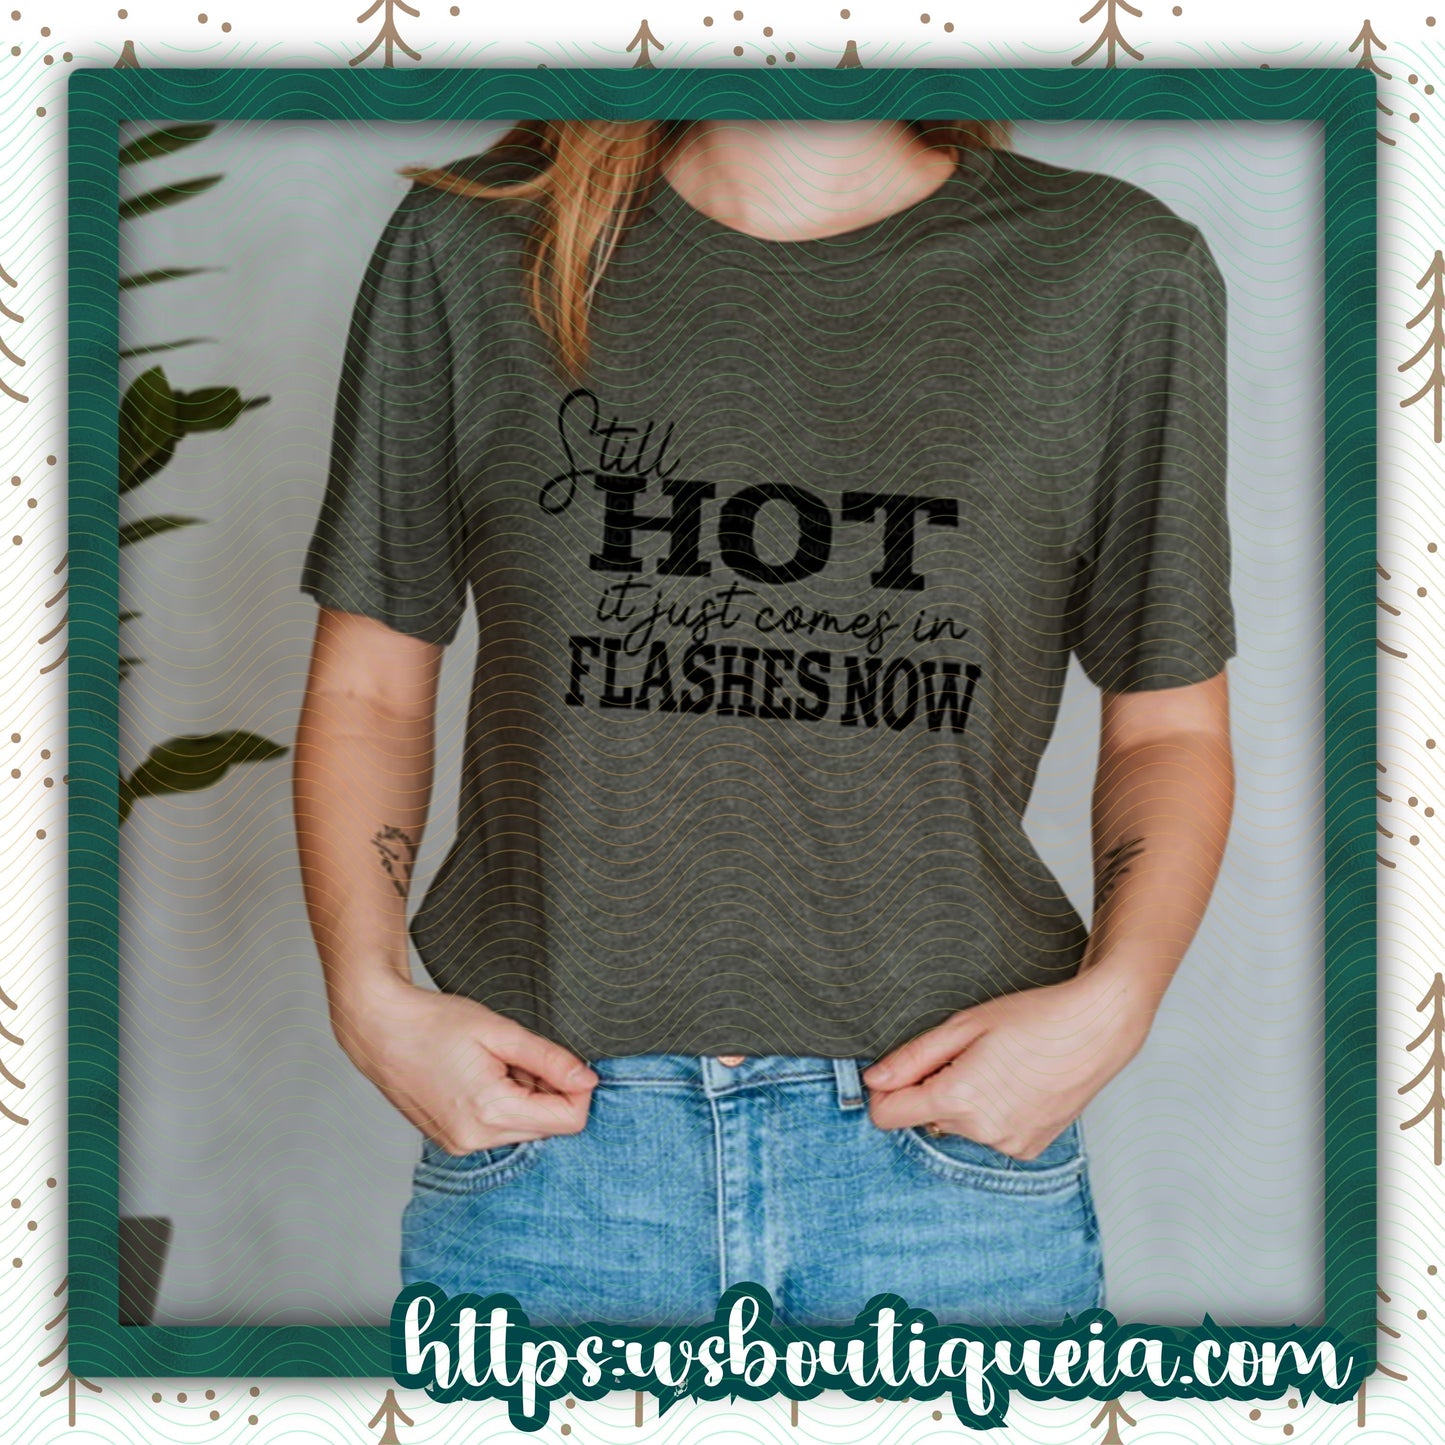 Still Hot It Just Comes In Flashes Now Graphic Tee/Sweatshirt